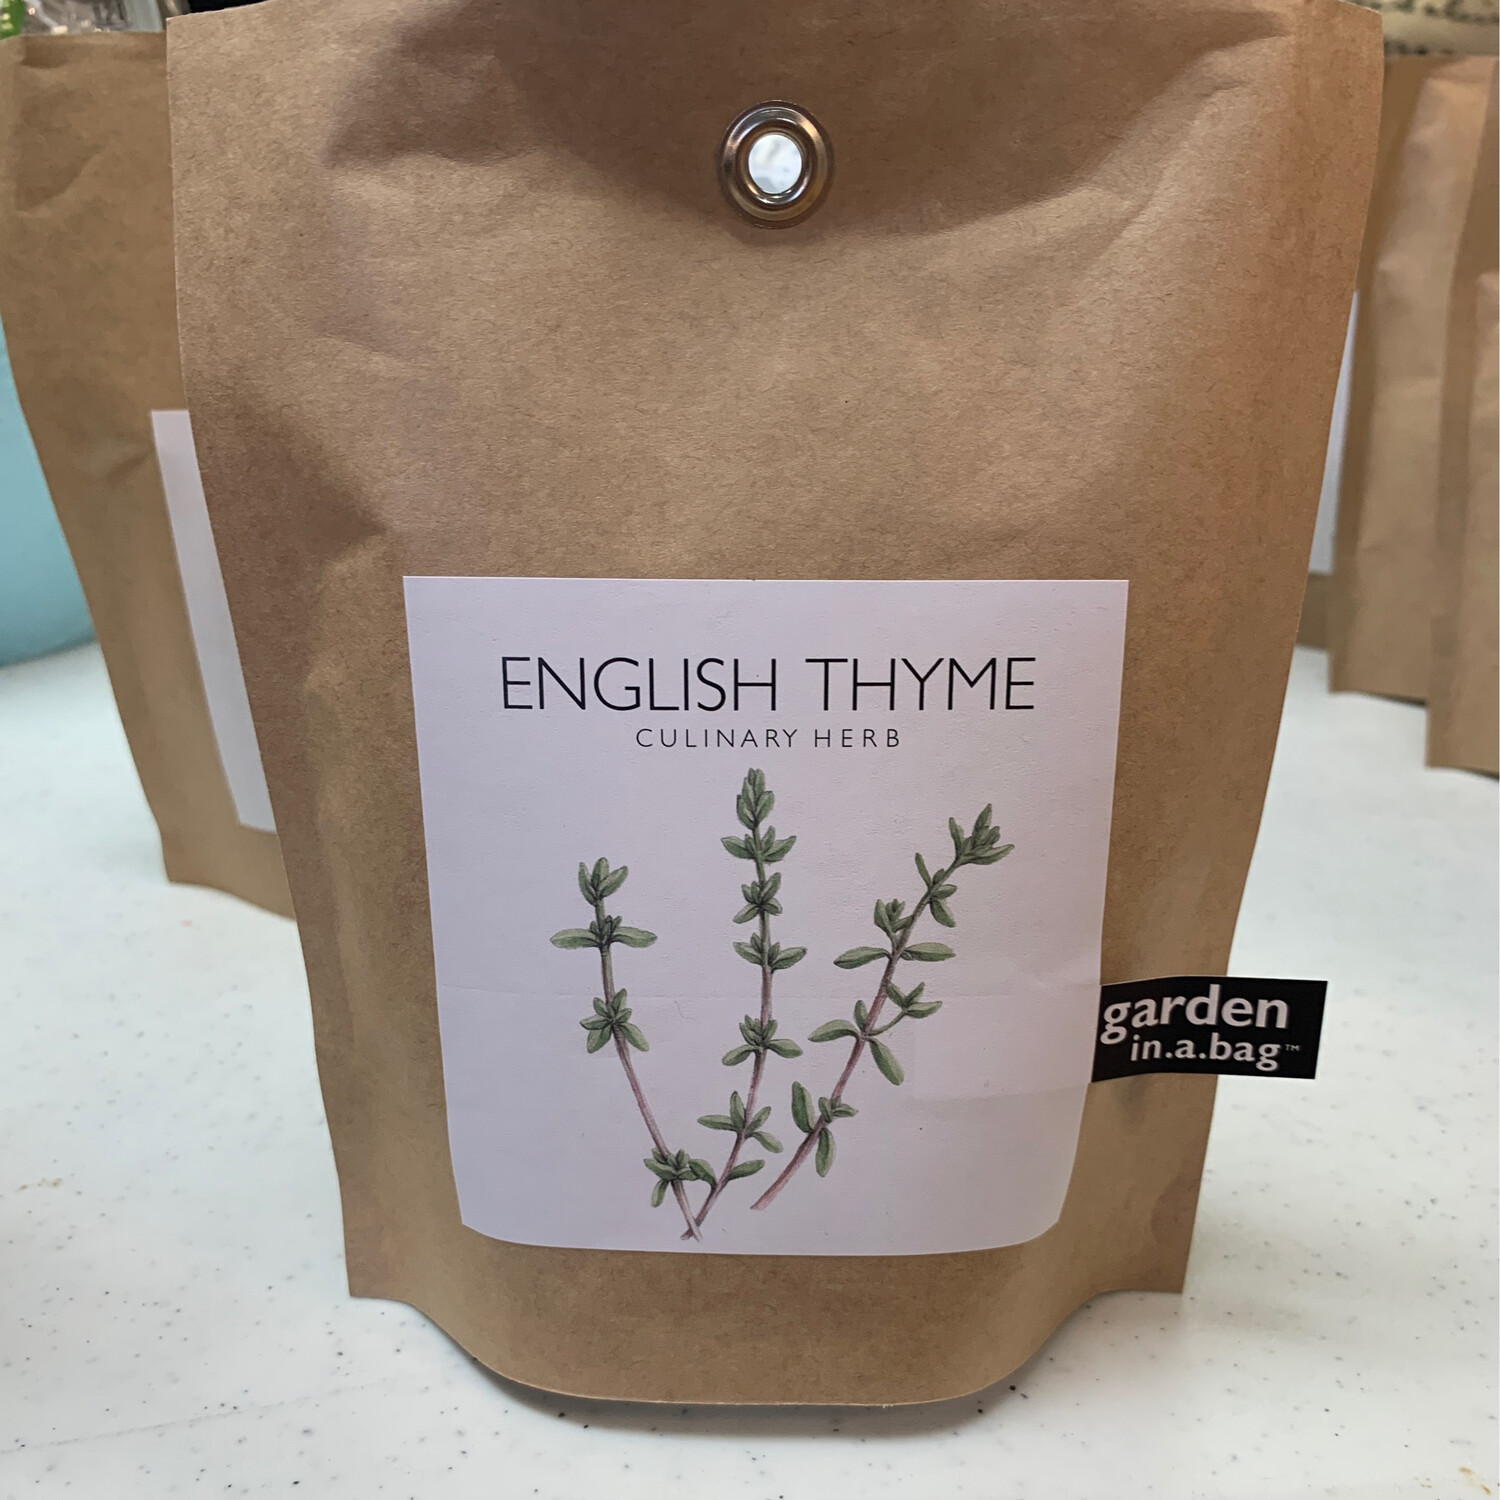 English Thyme in a bag